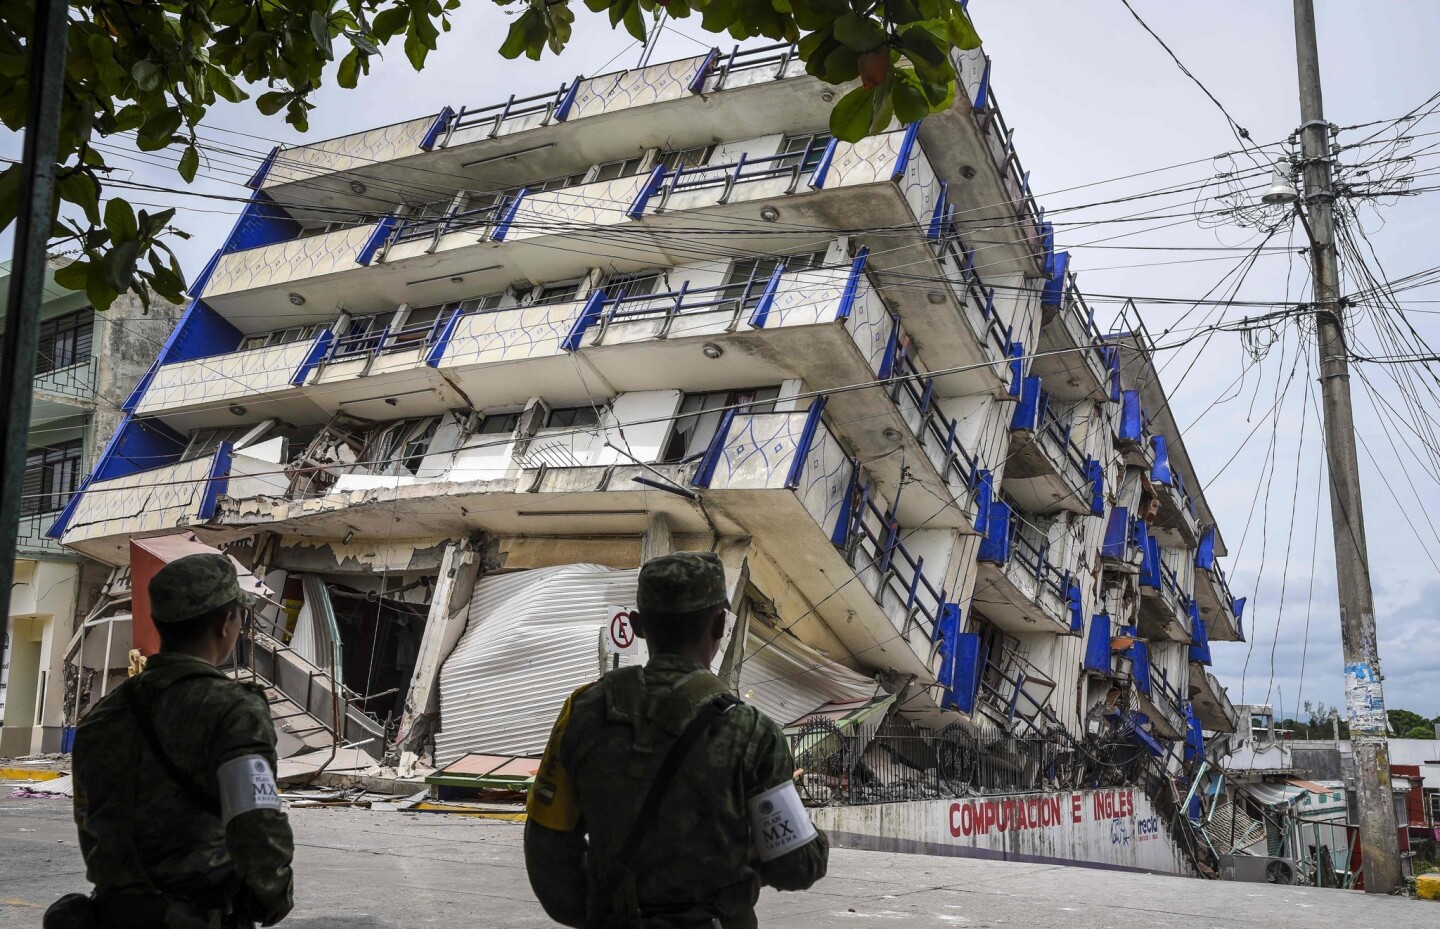 Soldiers stand guard near the Sensacion hotel which collapsed with the powerful earthquake that struck Mexico overnight, in Matias Romero, Oaxaca State.